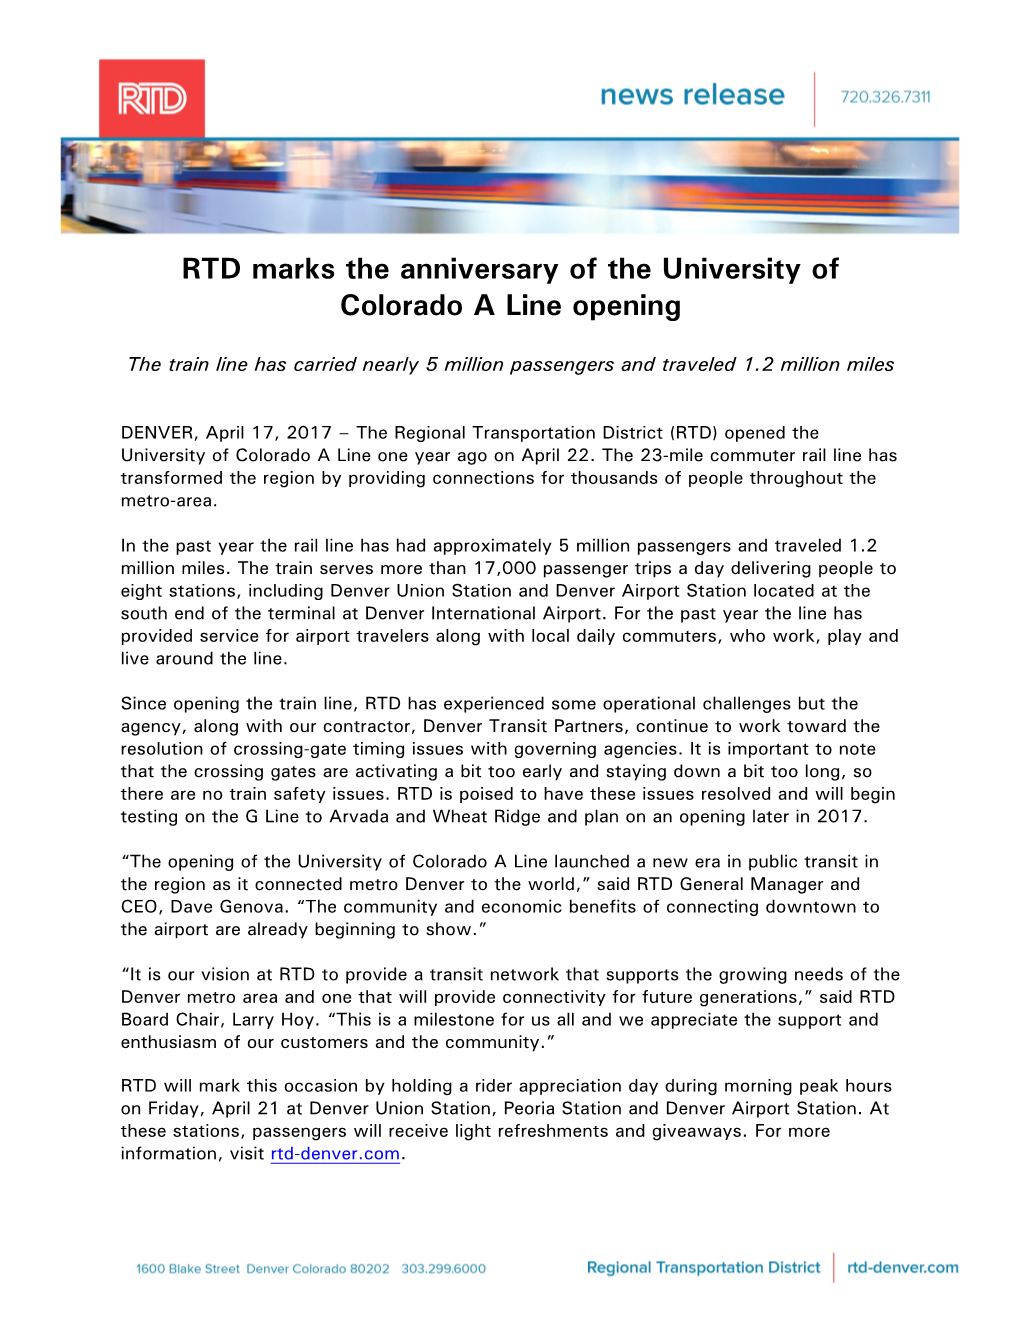 RTD Marks the Anniversary of the University of Colorado a Line Opening